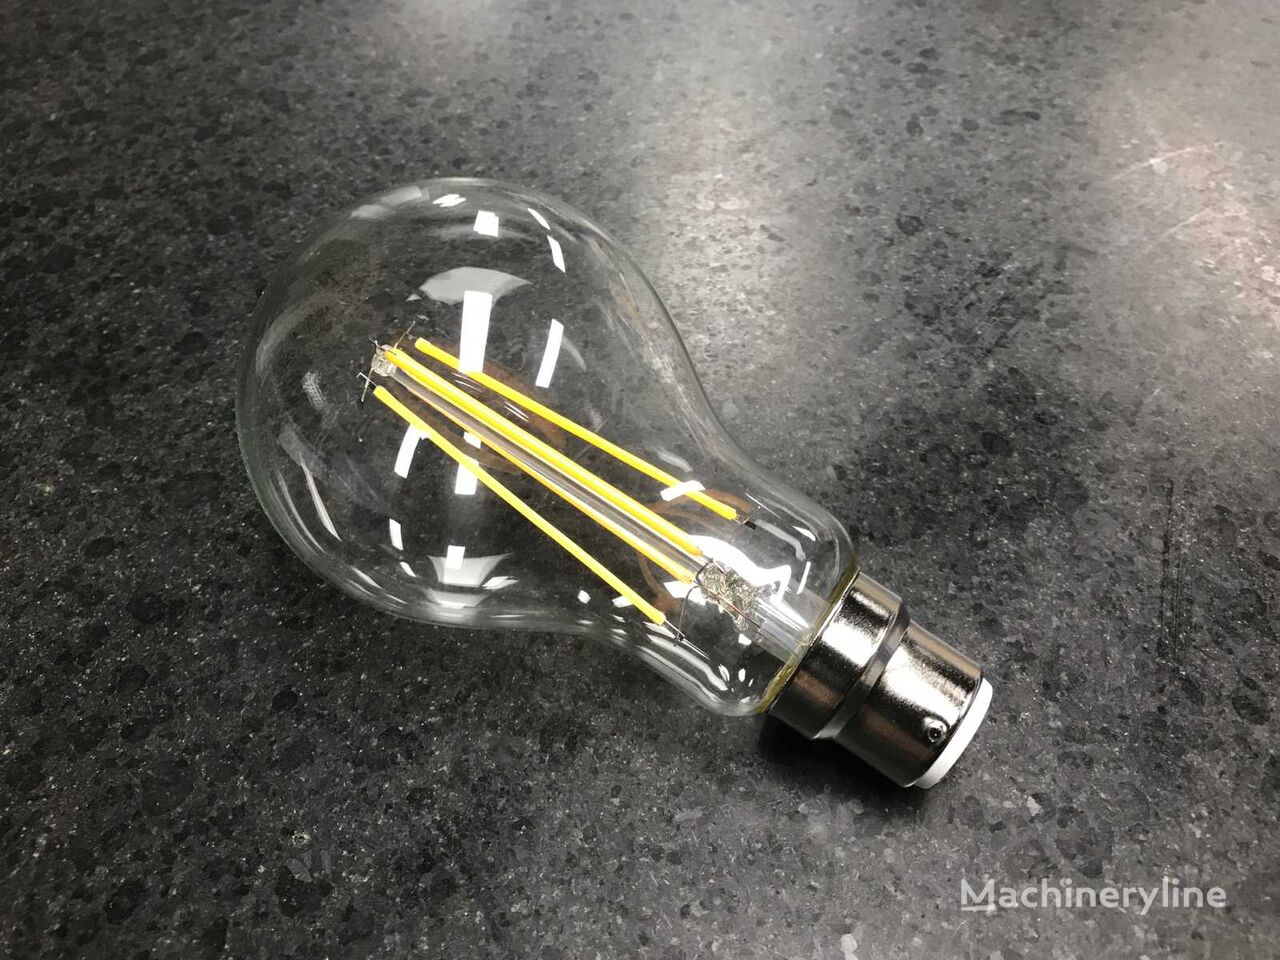 LED Lamp (120x) electrical accessories